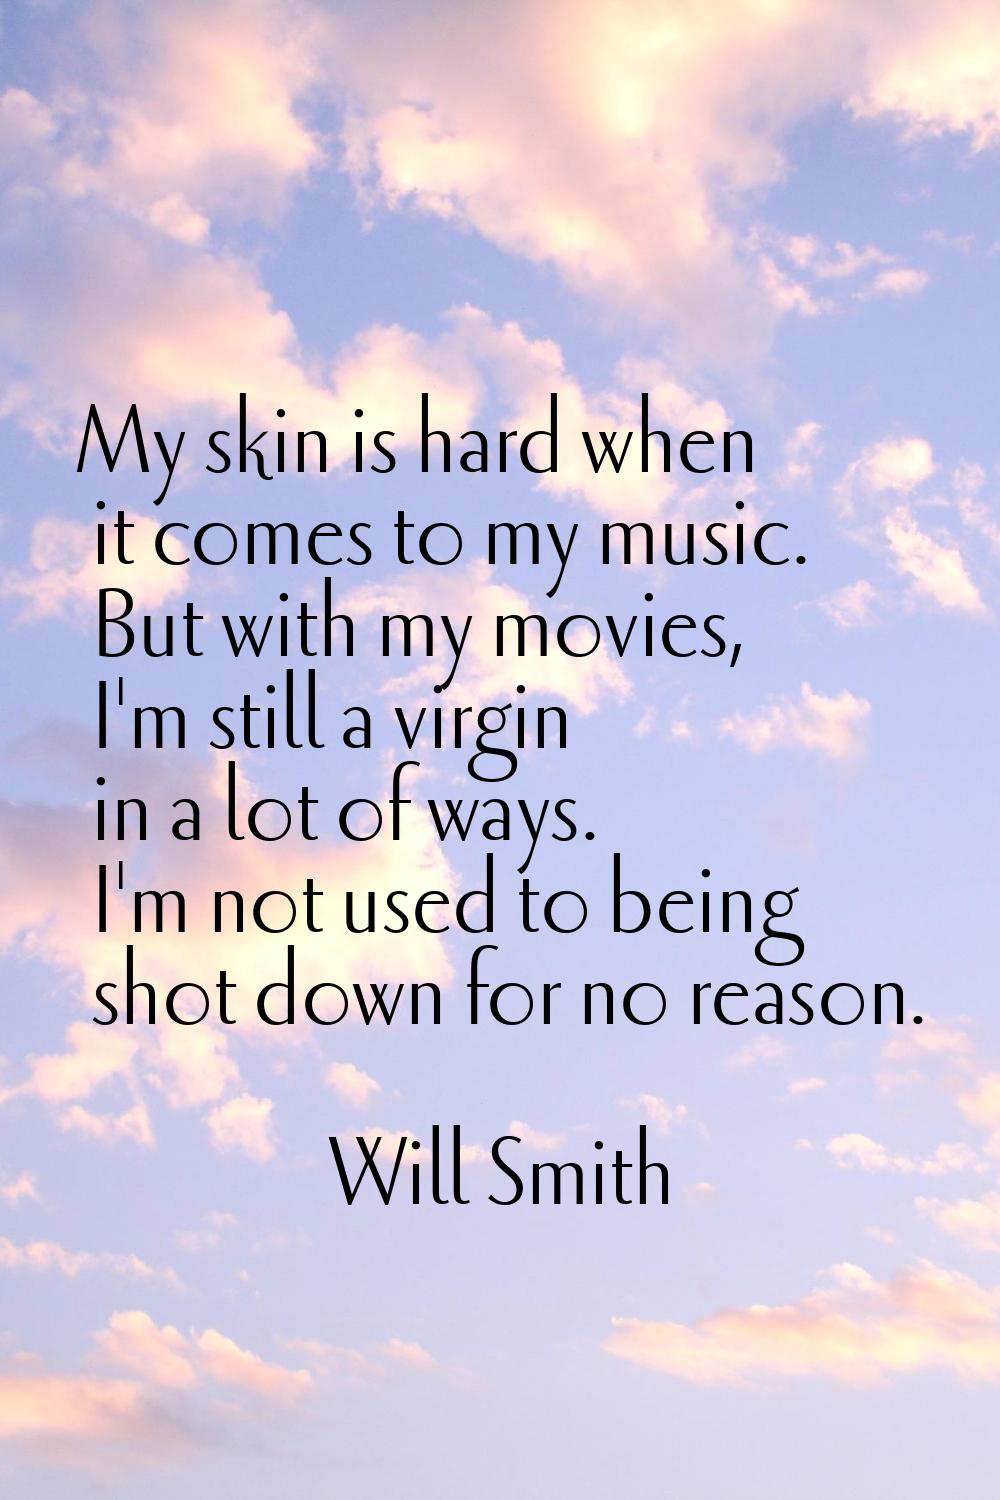 My skin is hard when it comes to my music. But with my movies, I'm still a virgin in a lot of ways.